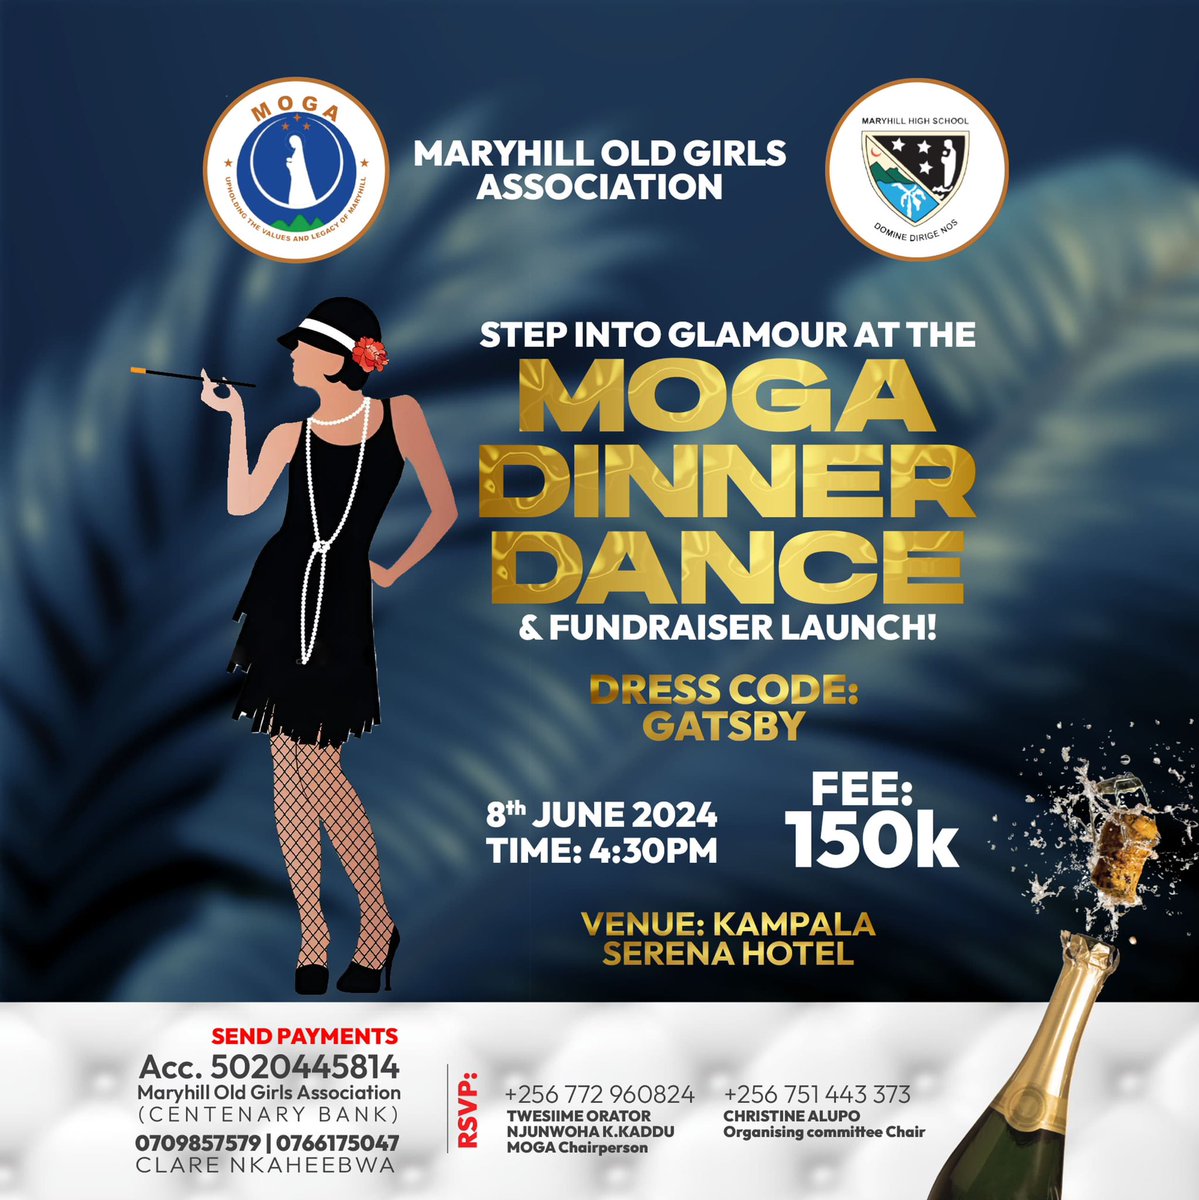 Get your Gatsby themed outfit ready for our dinner and fundraiser launch!✨🎊 We are only 10 days away to the soirée full of glitz, glam and giggles! Get ready to party like it's 1924!💃🏾 Maryhill High School Old Girls and well-wishers, we look forward to seeing you. #MOGADinner